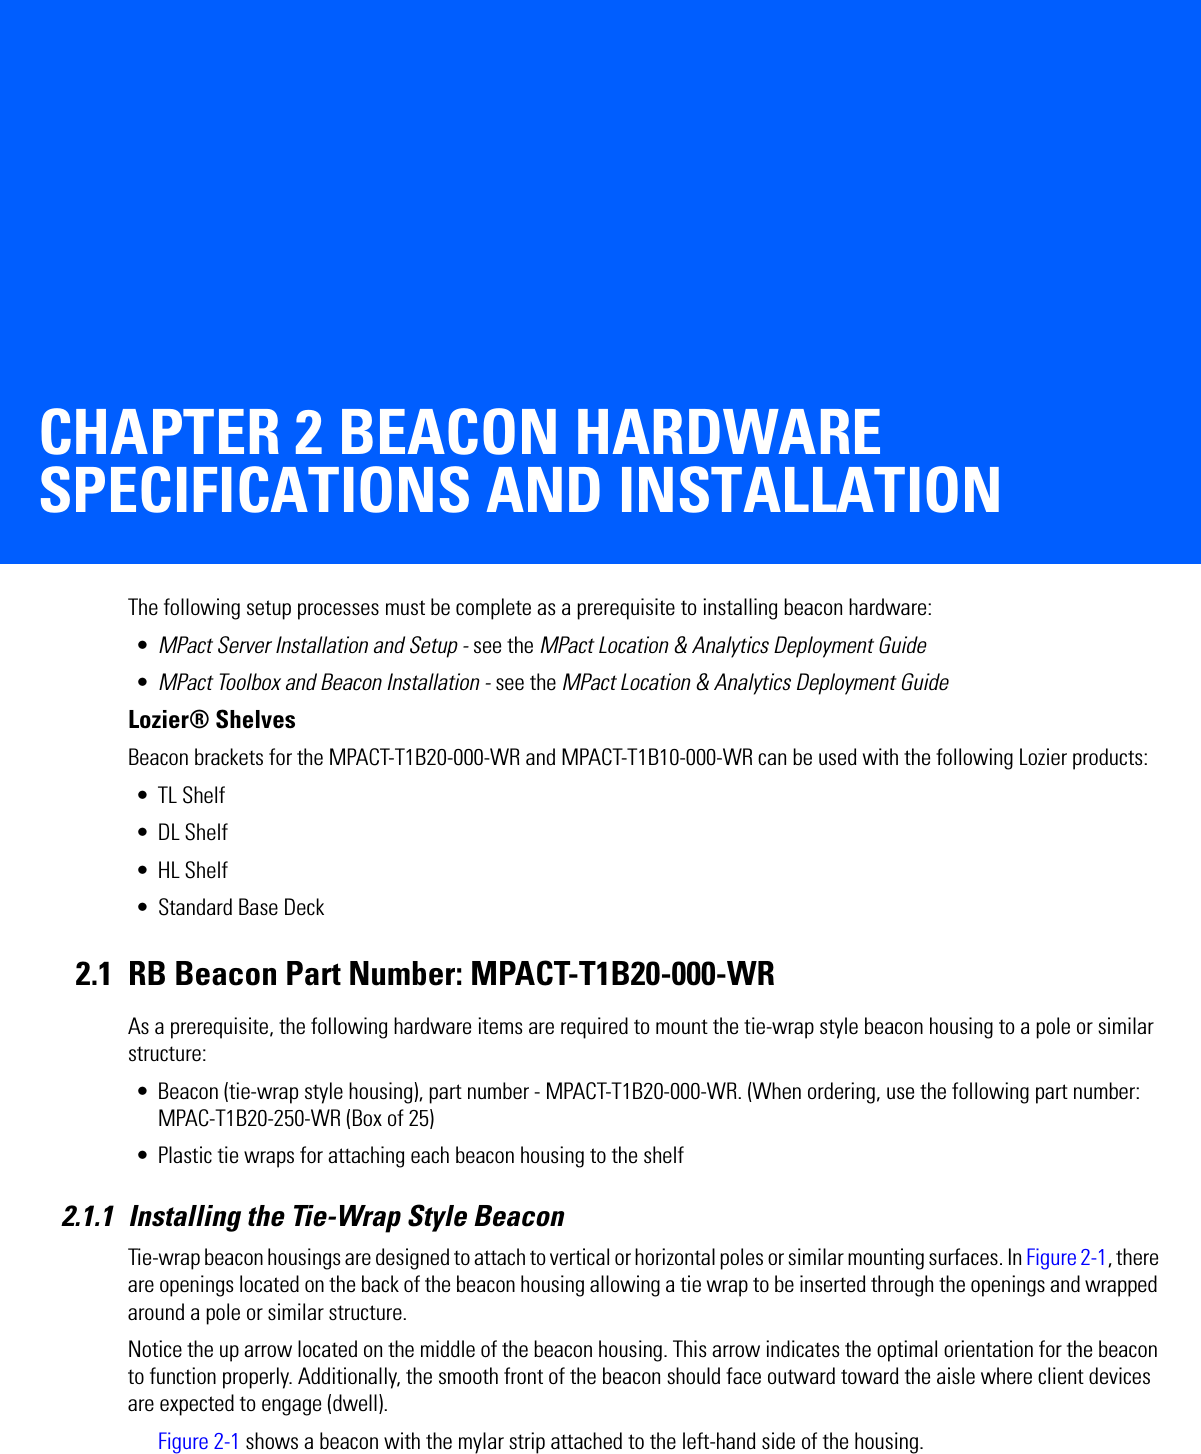 CHAPTER 2 BEACON HARDWARE SPECIFICATIONS AND INSTALLATIONThe following setup processes must be complete as a prerequisite to installing beacon hardware:•MPact Server Installation and Setup - see the MPact Location &amp; Analytics Deployment Guide•MPact Toolbox and Beacon Installation - see the MPact Location &amp; Analytics Deployment GuideLozier® ShelvesBeacon brackets for the MPACT-T1B20-000-WR and MPACT-T1B10-000-WR can be used with the following Lozier products:• TL Shelf•DL Shelf•HL Shelf• Standard Base Deck2.1 RB Beacon Part Number: MPACT-T1B20-000-WRAs a prerequisite, the following hardware items are required to mount the tie-wrap style beacon housing to a pole or similar structure:• Beacon (tie-wrap style housing), part number - MPACT-T1B20-000-WR. (When ordering, use the following part number: MPAC-T1B20-250-WR (Box of 25)• Plastic tie wraps for attaching each beacon housing to the shelf2.1.1 Installing the Tie-Wrap Style BeaconTie-wrap beacon housings are designed to attach to vertical or horizontal poles or similar mounting surfaces. In Figure 2-1, there are openings located on the back of the beacon housing allowing a tie wrap to be inserted through the openings and wrapped around a pole or similar structure. Notice the up arrow located on the middle of the beacon housing. This arrow indicates the optimal orientation for the beacon to function properly. Additionally, the smooth front of the beacon should face outward toward the aisle where client devices are expected to engage (dwell). Figure 2-1 shows a beacon with the mylar strip attached to the left-hand side of the housing.